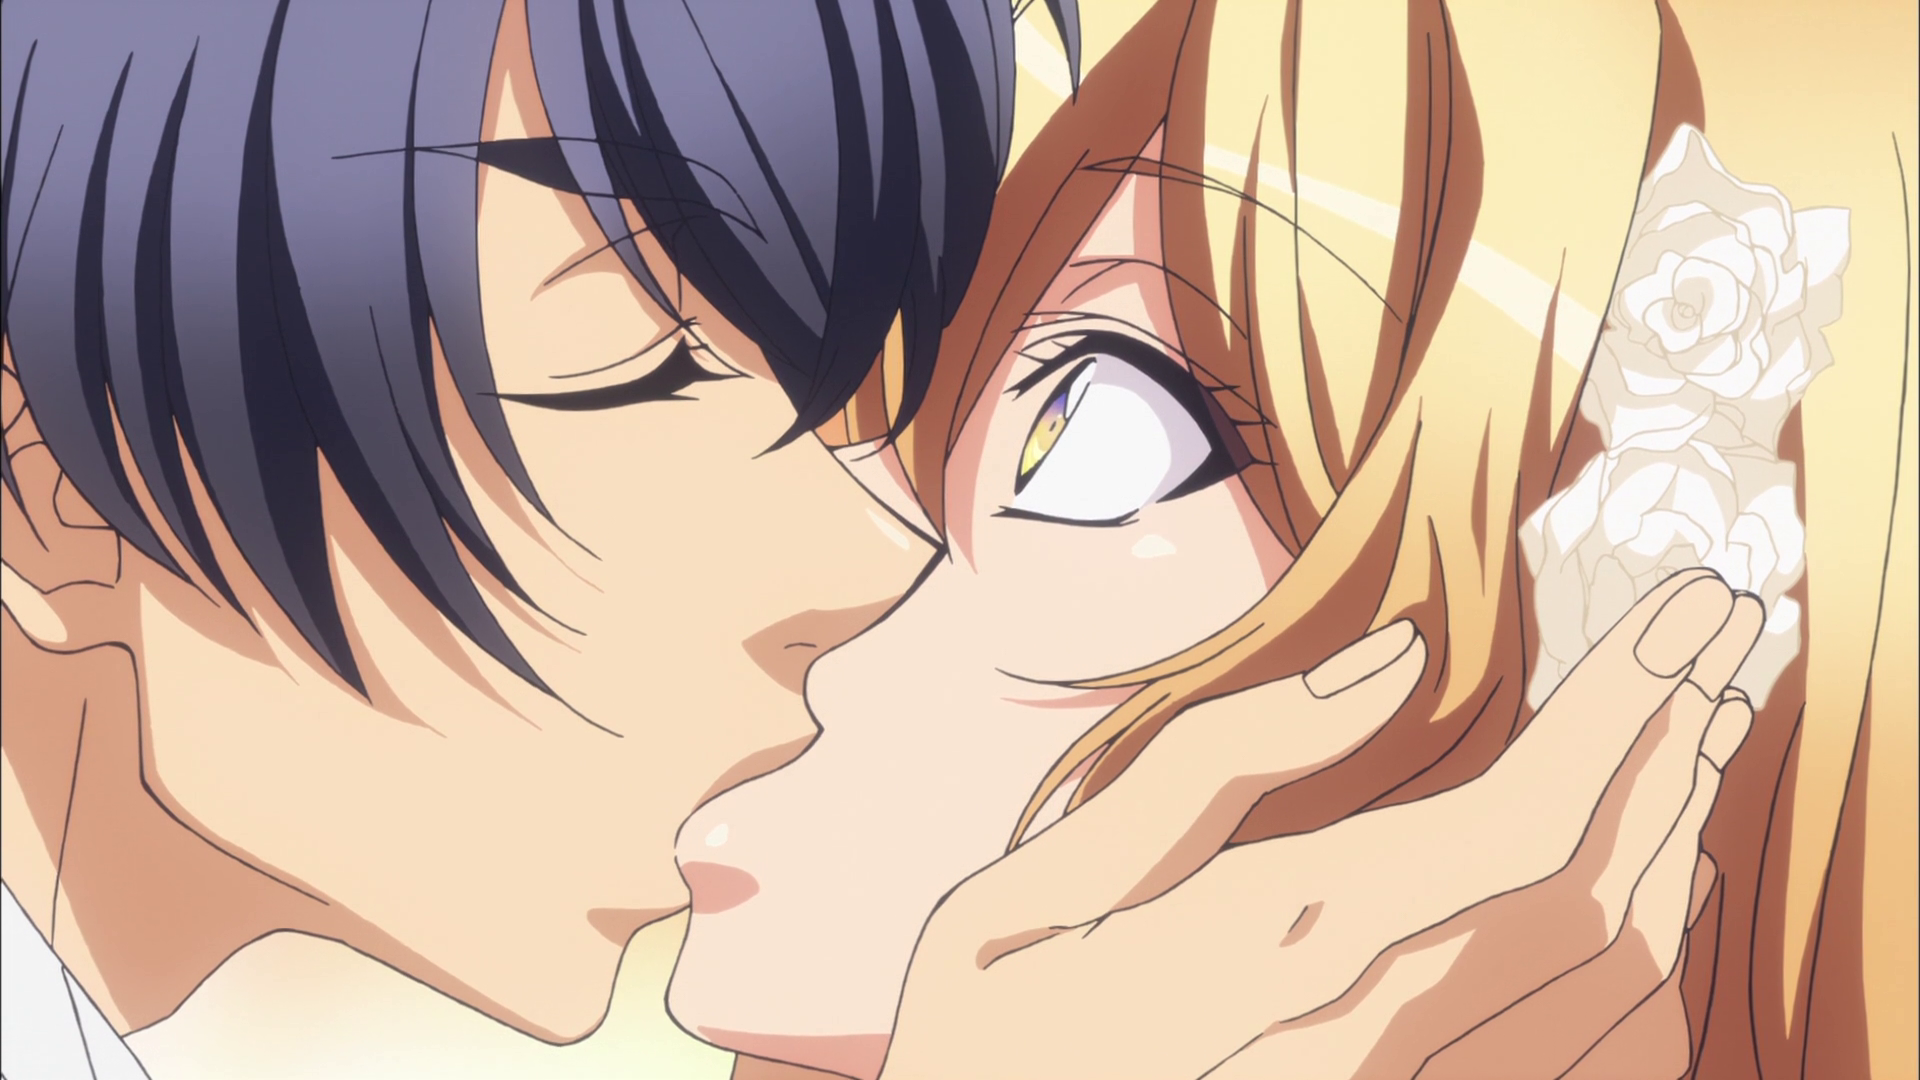 Ready for the second episode of Love Stage? 